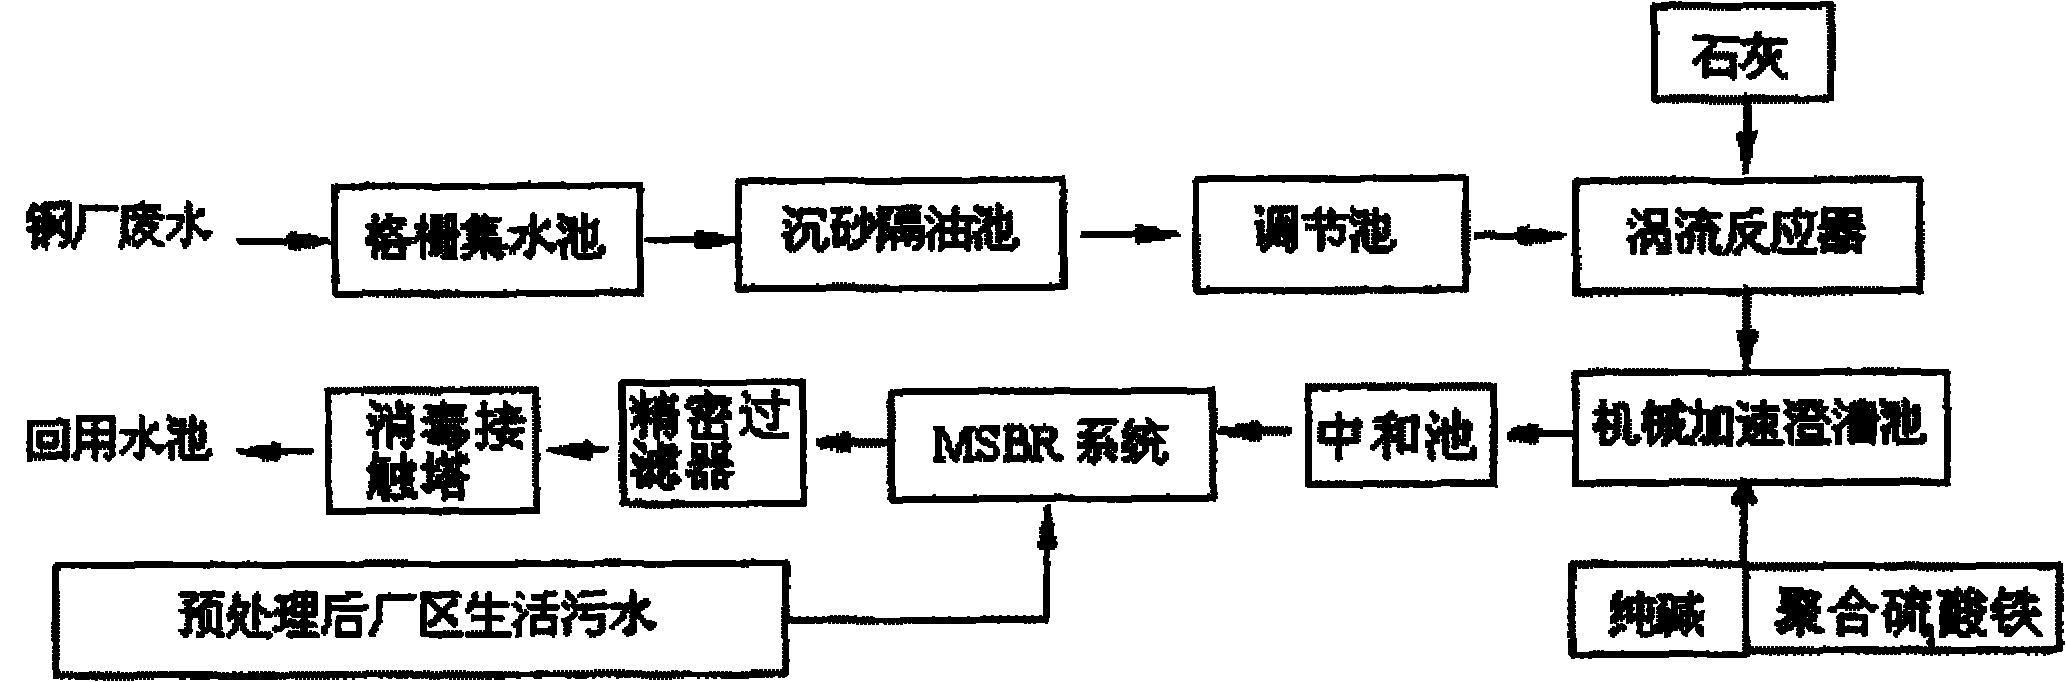 Method for treating and recycling waste water of steel plants